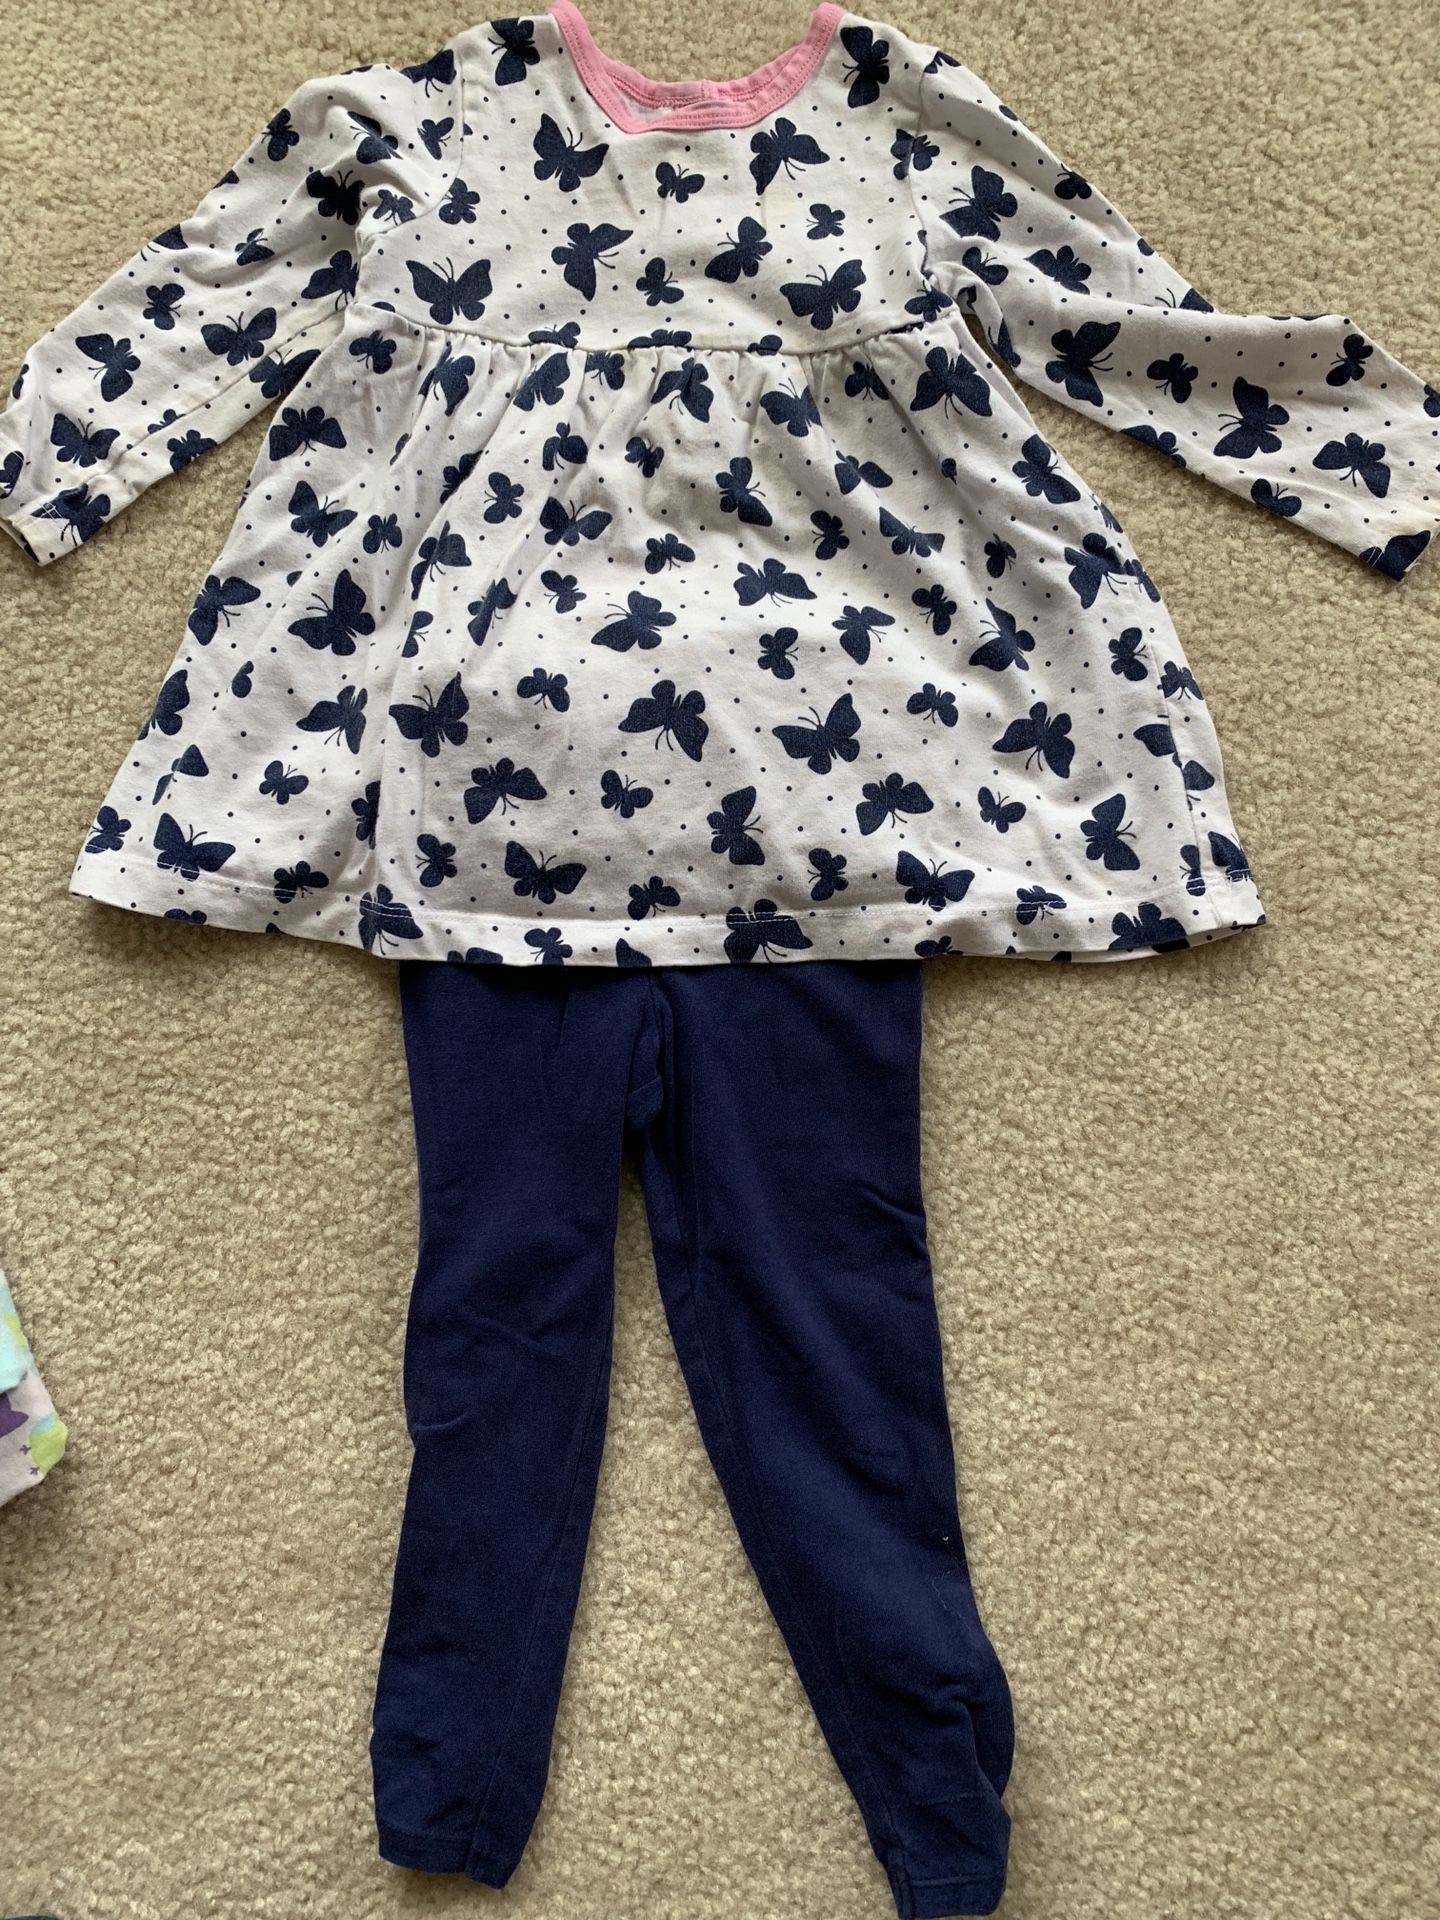 3 Baby girl outfits (size 24 months)